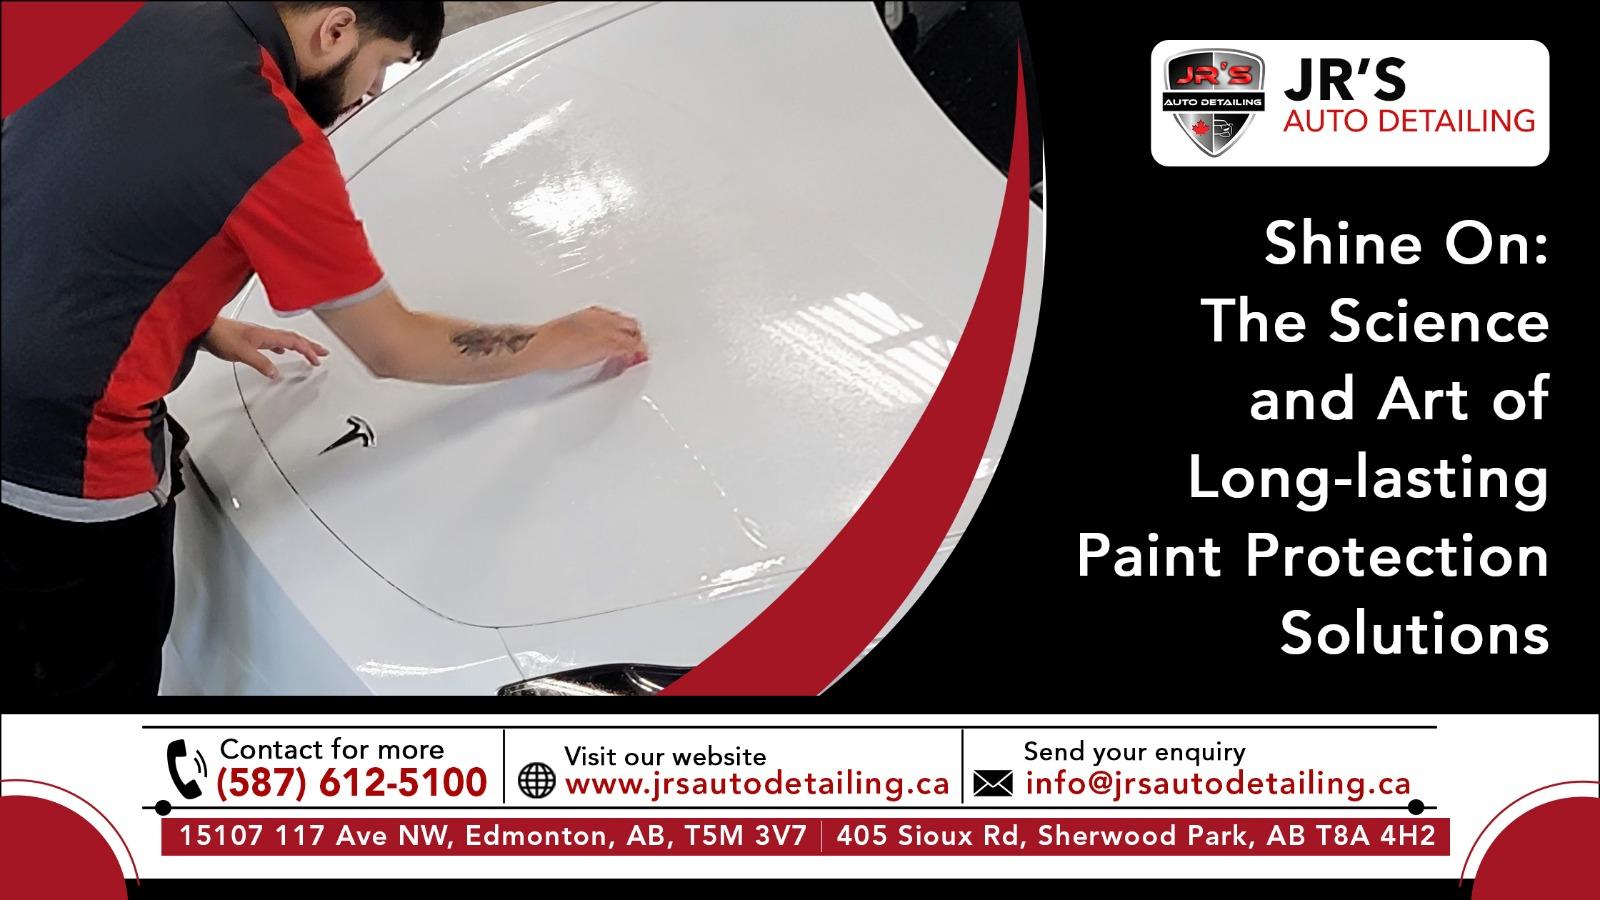 Shine On The Science and Art of Long lasting Paint Protection Solutions